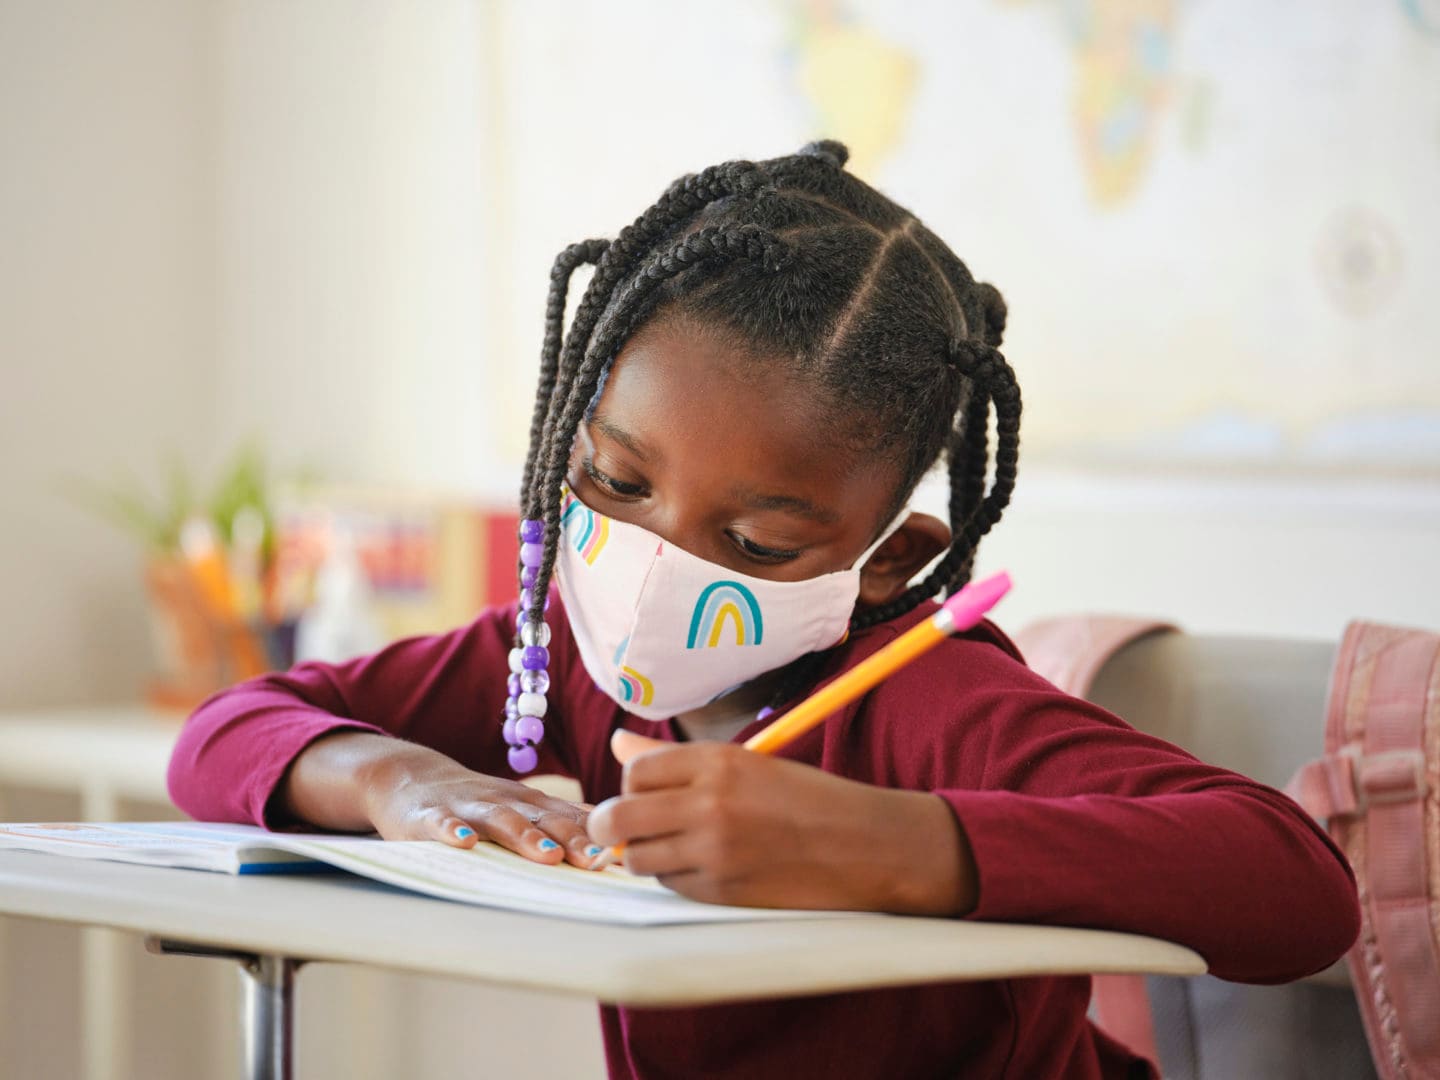 Pandemic schooling options are not created equal for all families